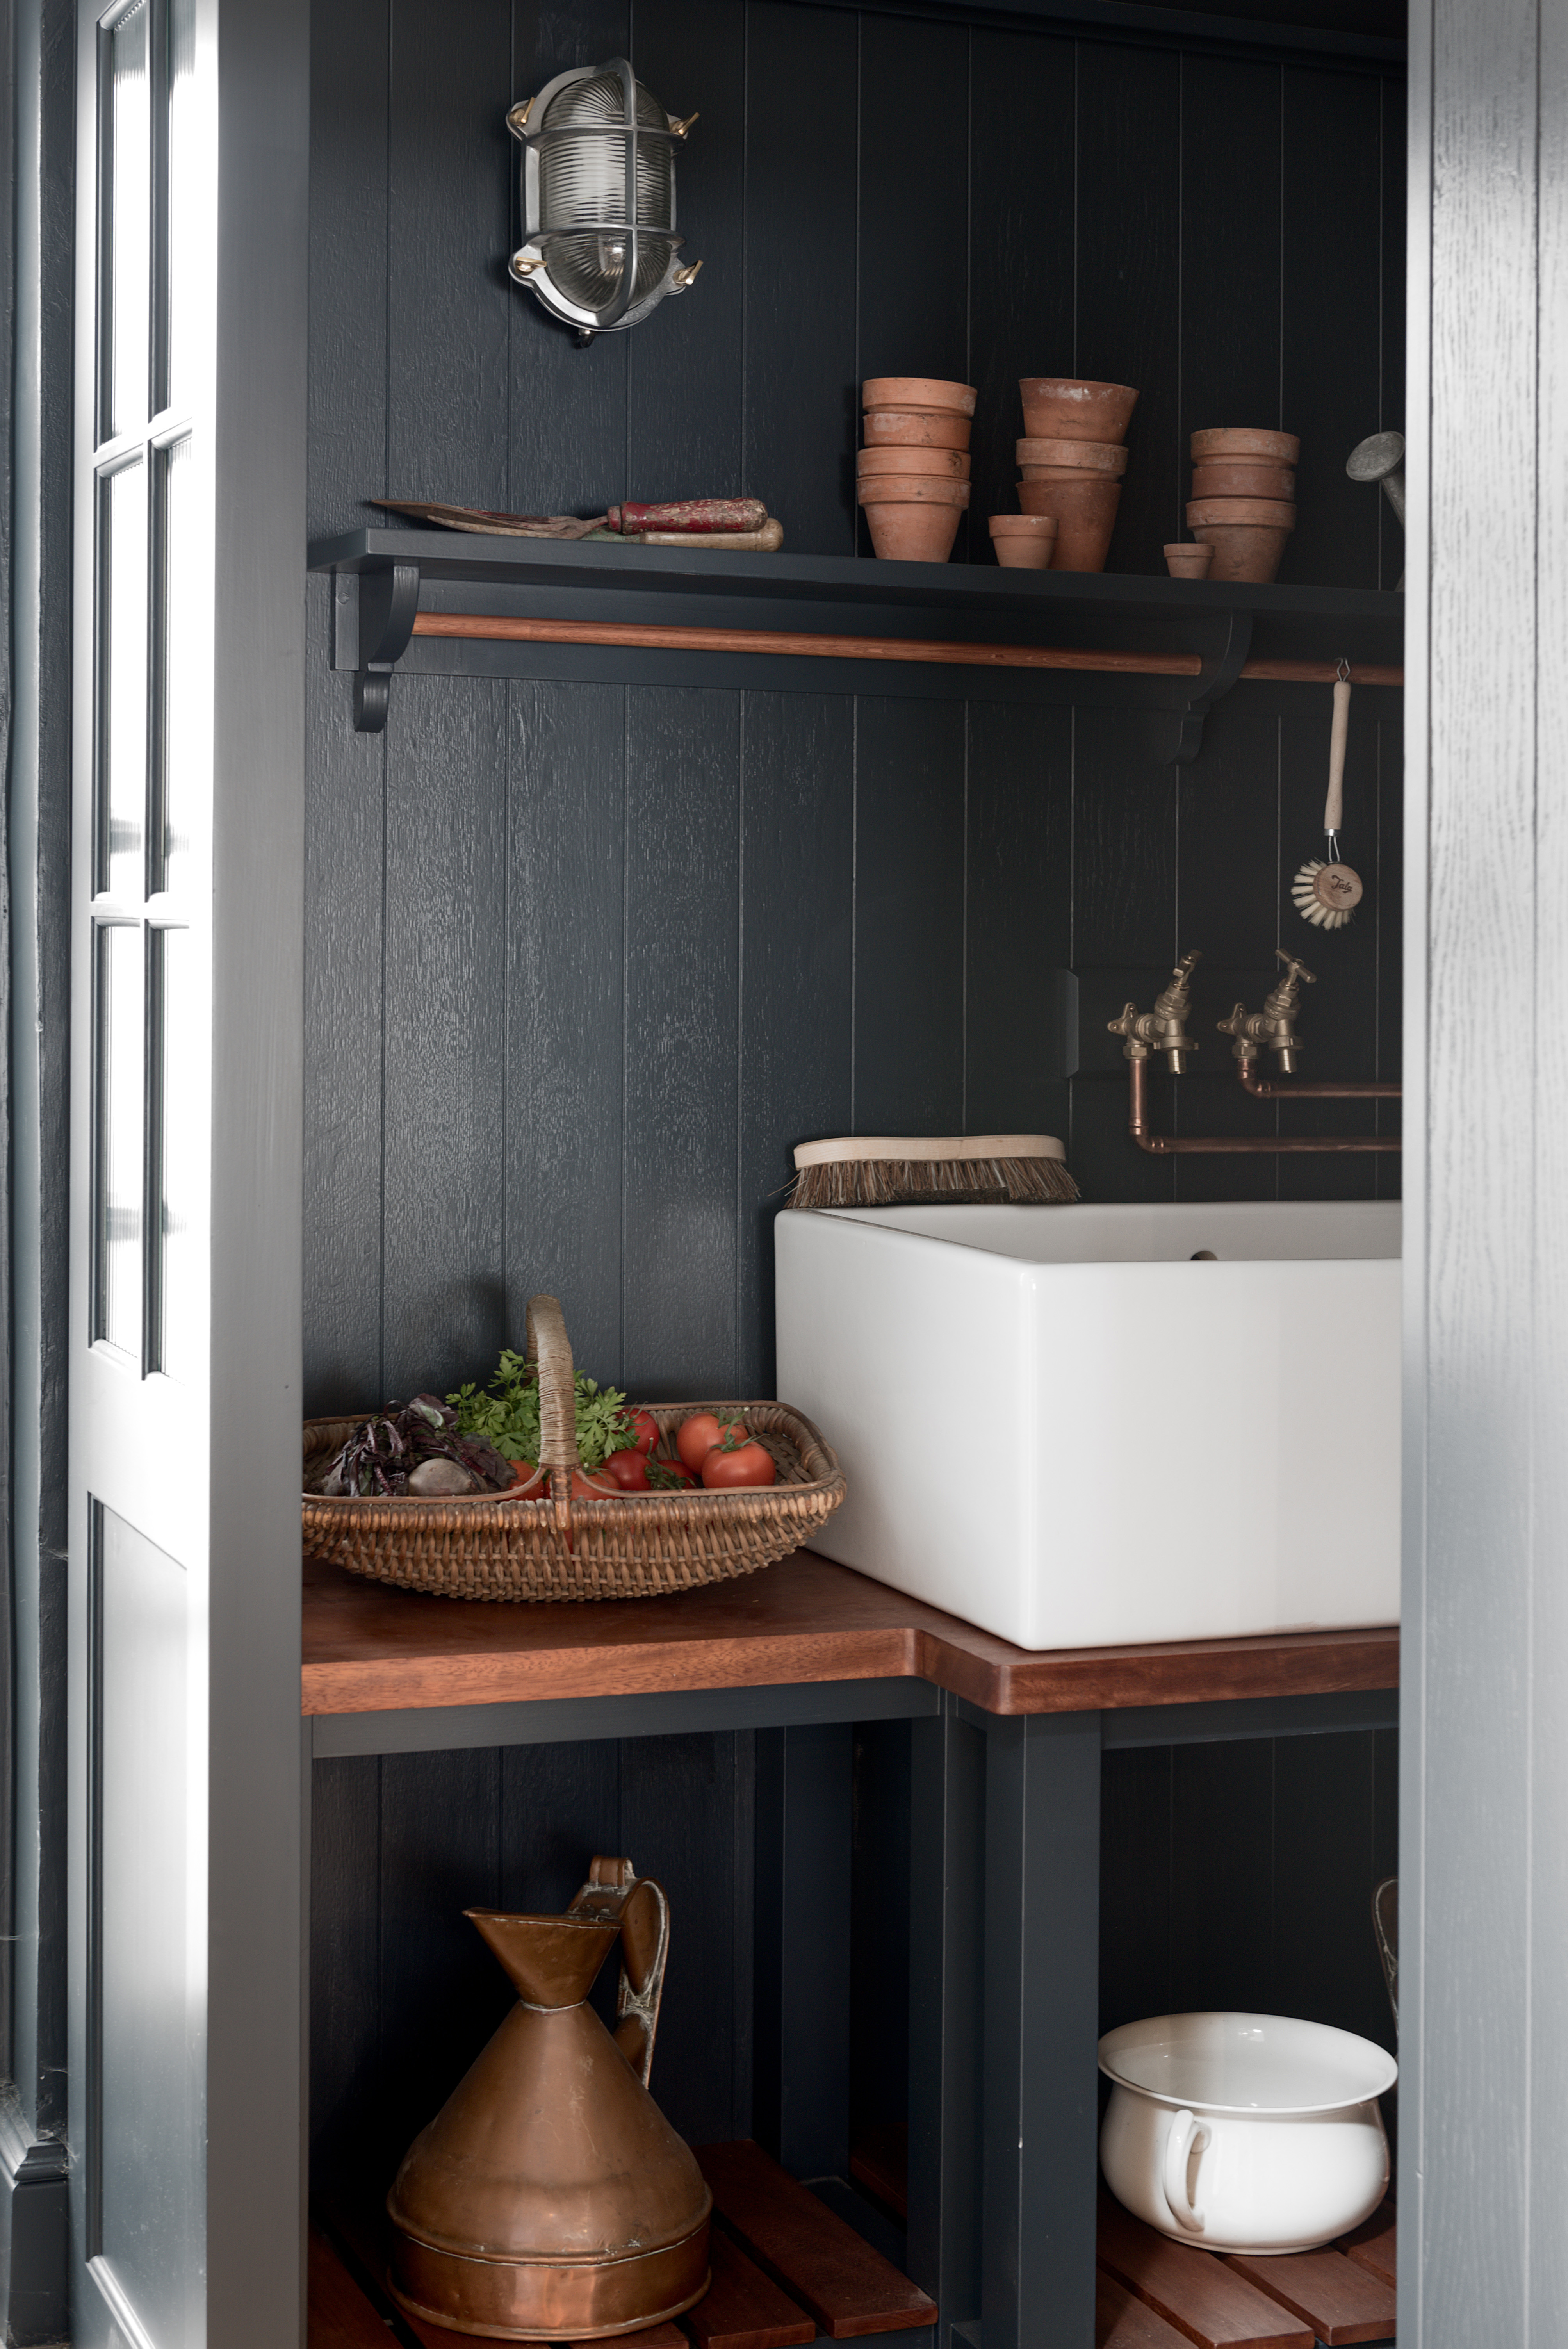 Small utility room ideas showing a dark room with stylish lighting and a basket of fresh vegetables